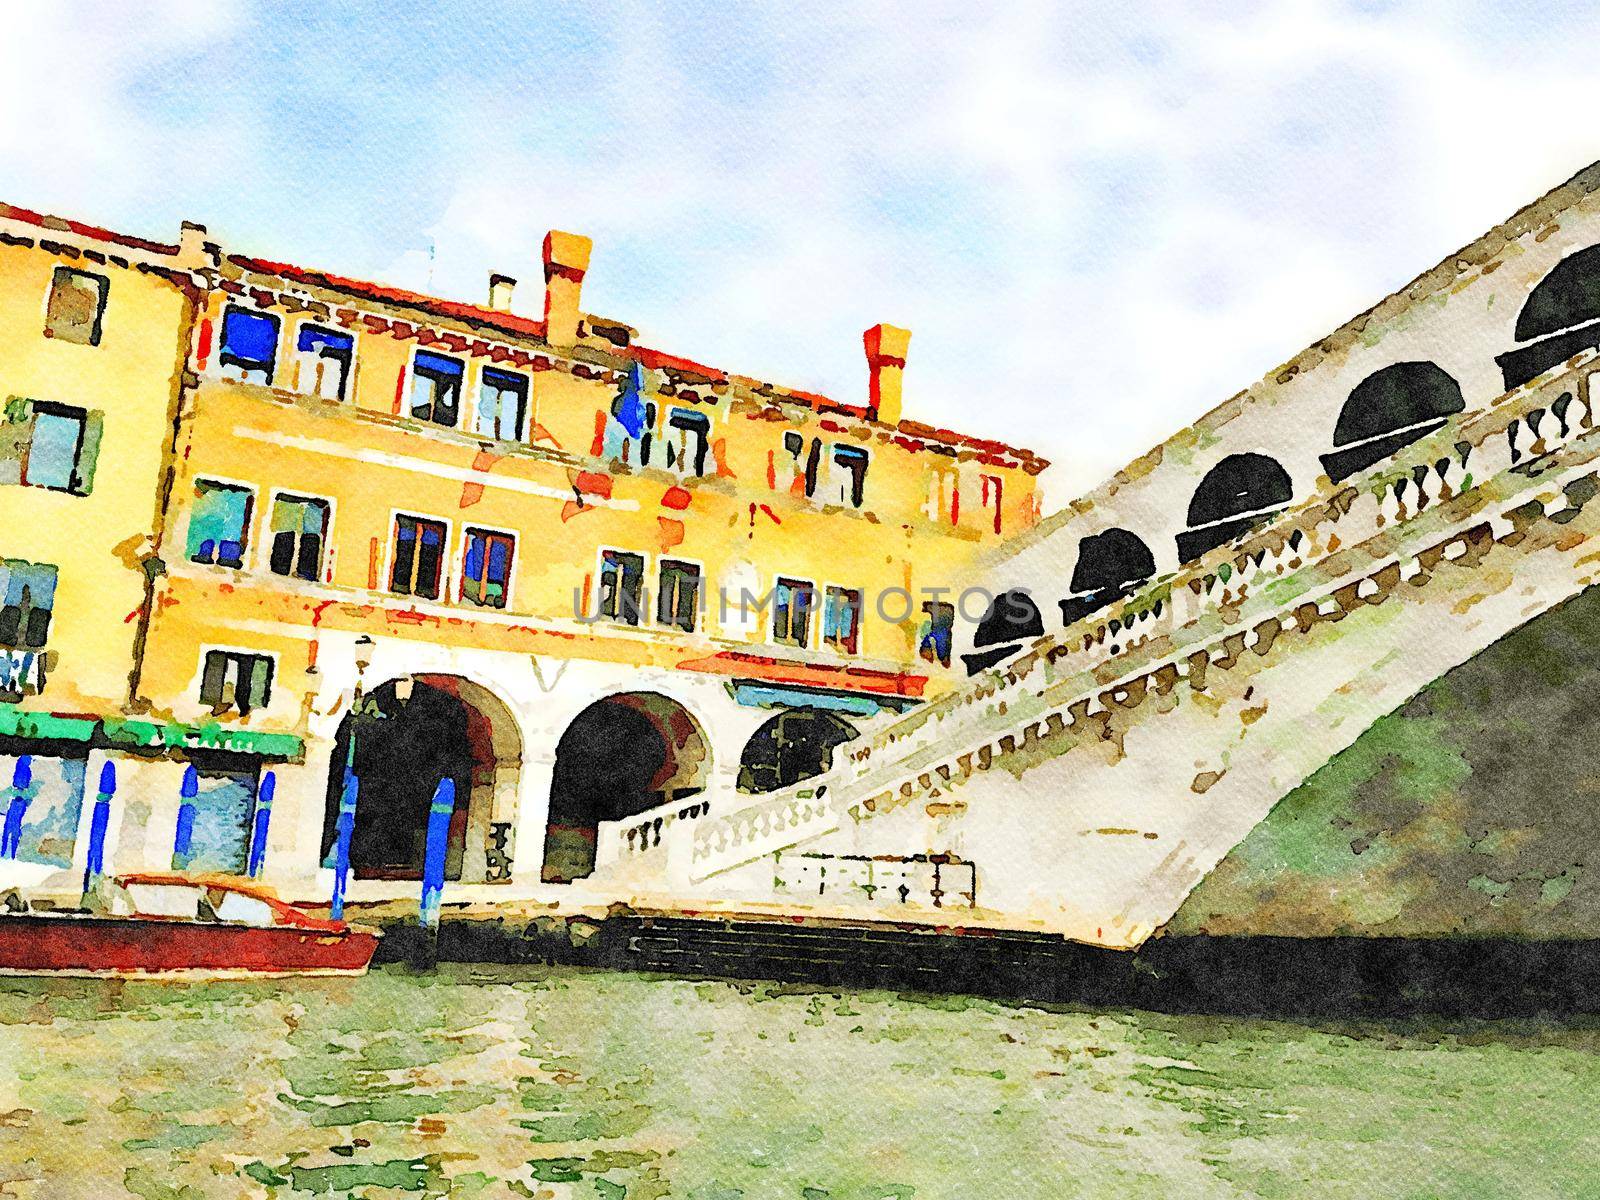 Watercolor which represents a glimpse of the famous Venice bridge over the Grand Canal